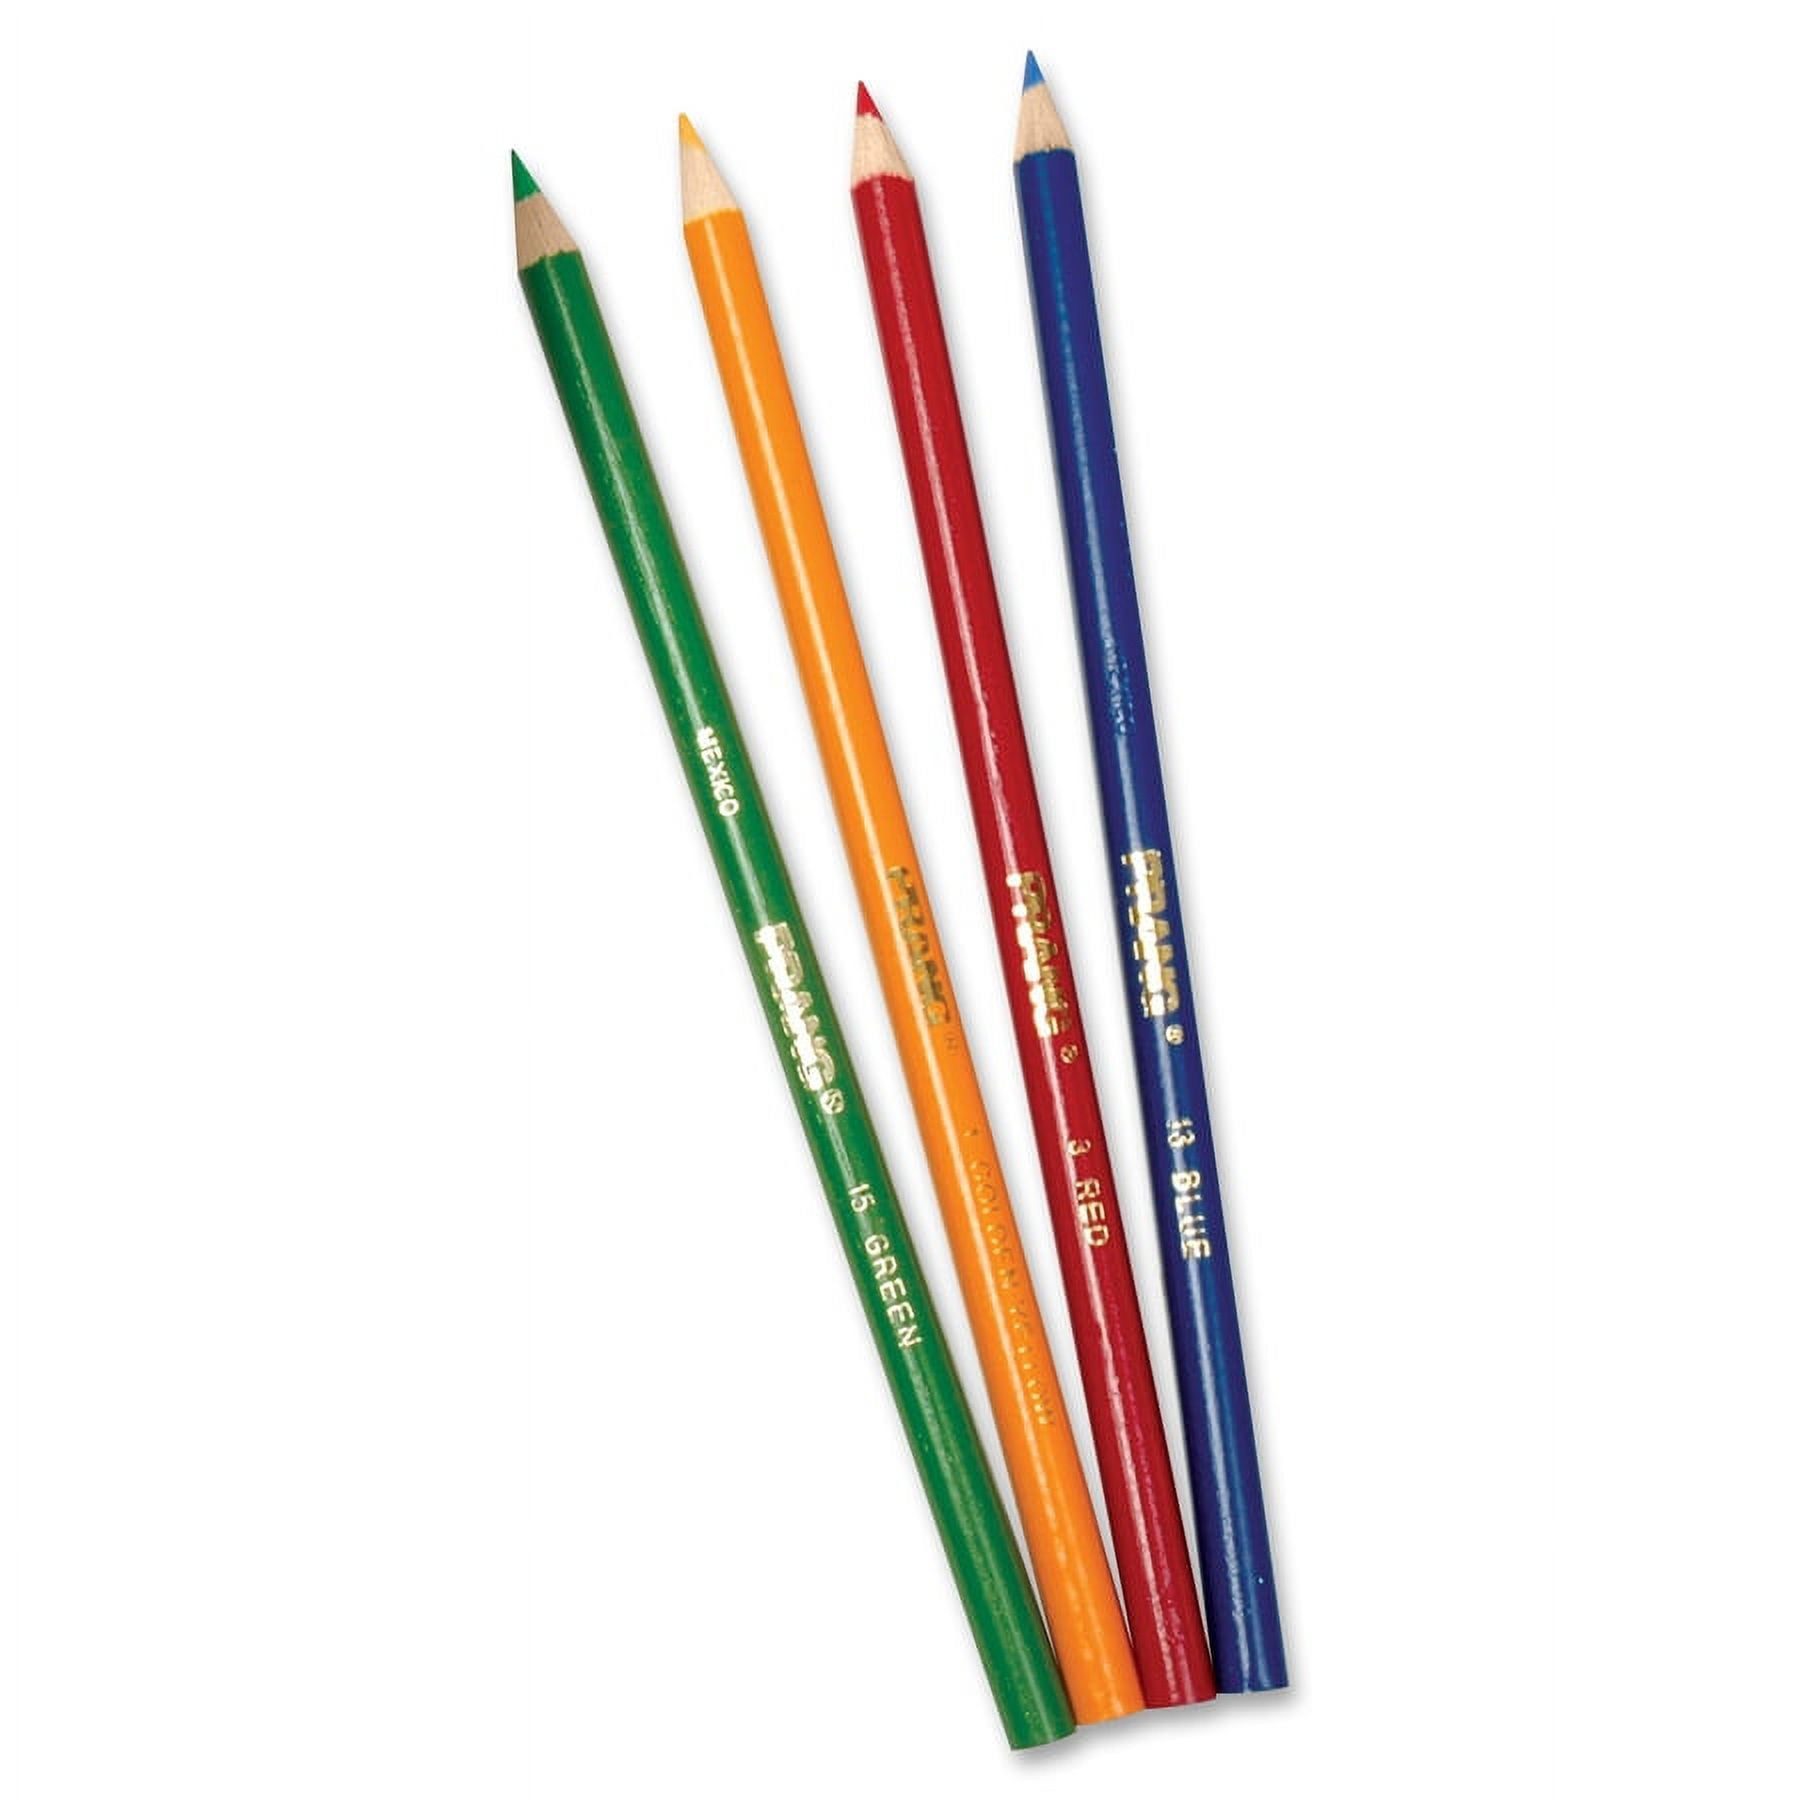 Prang Colored Pencils, Assorted Colors, Set of 36 